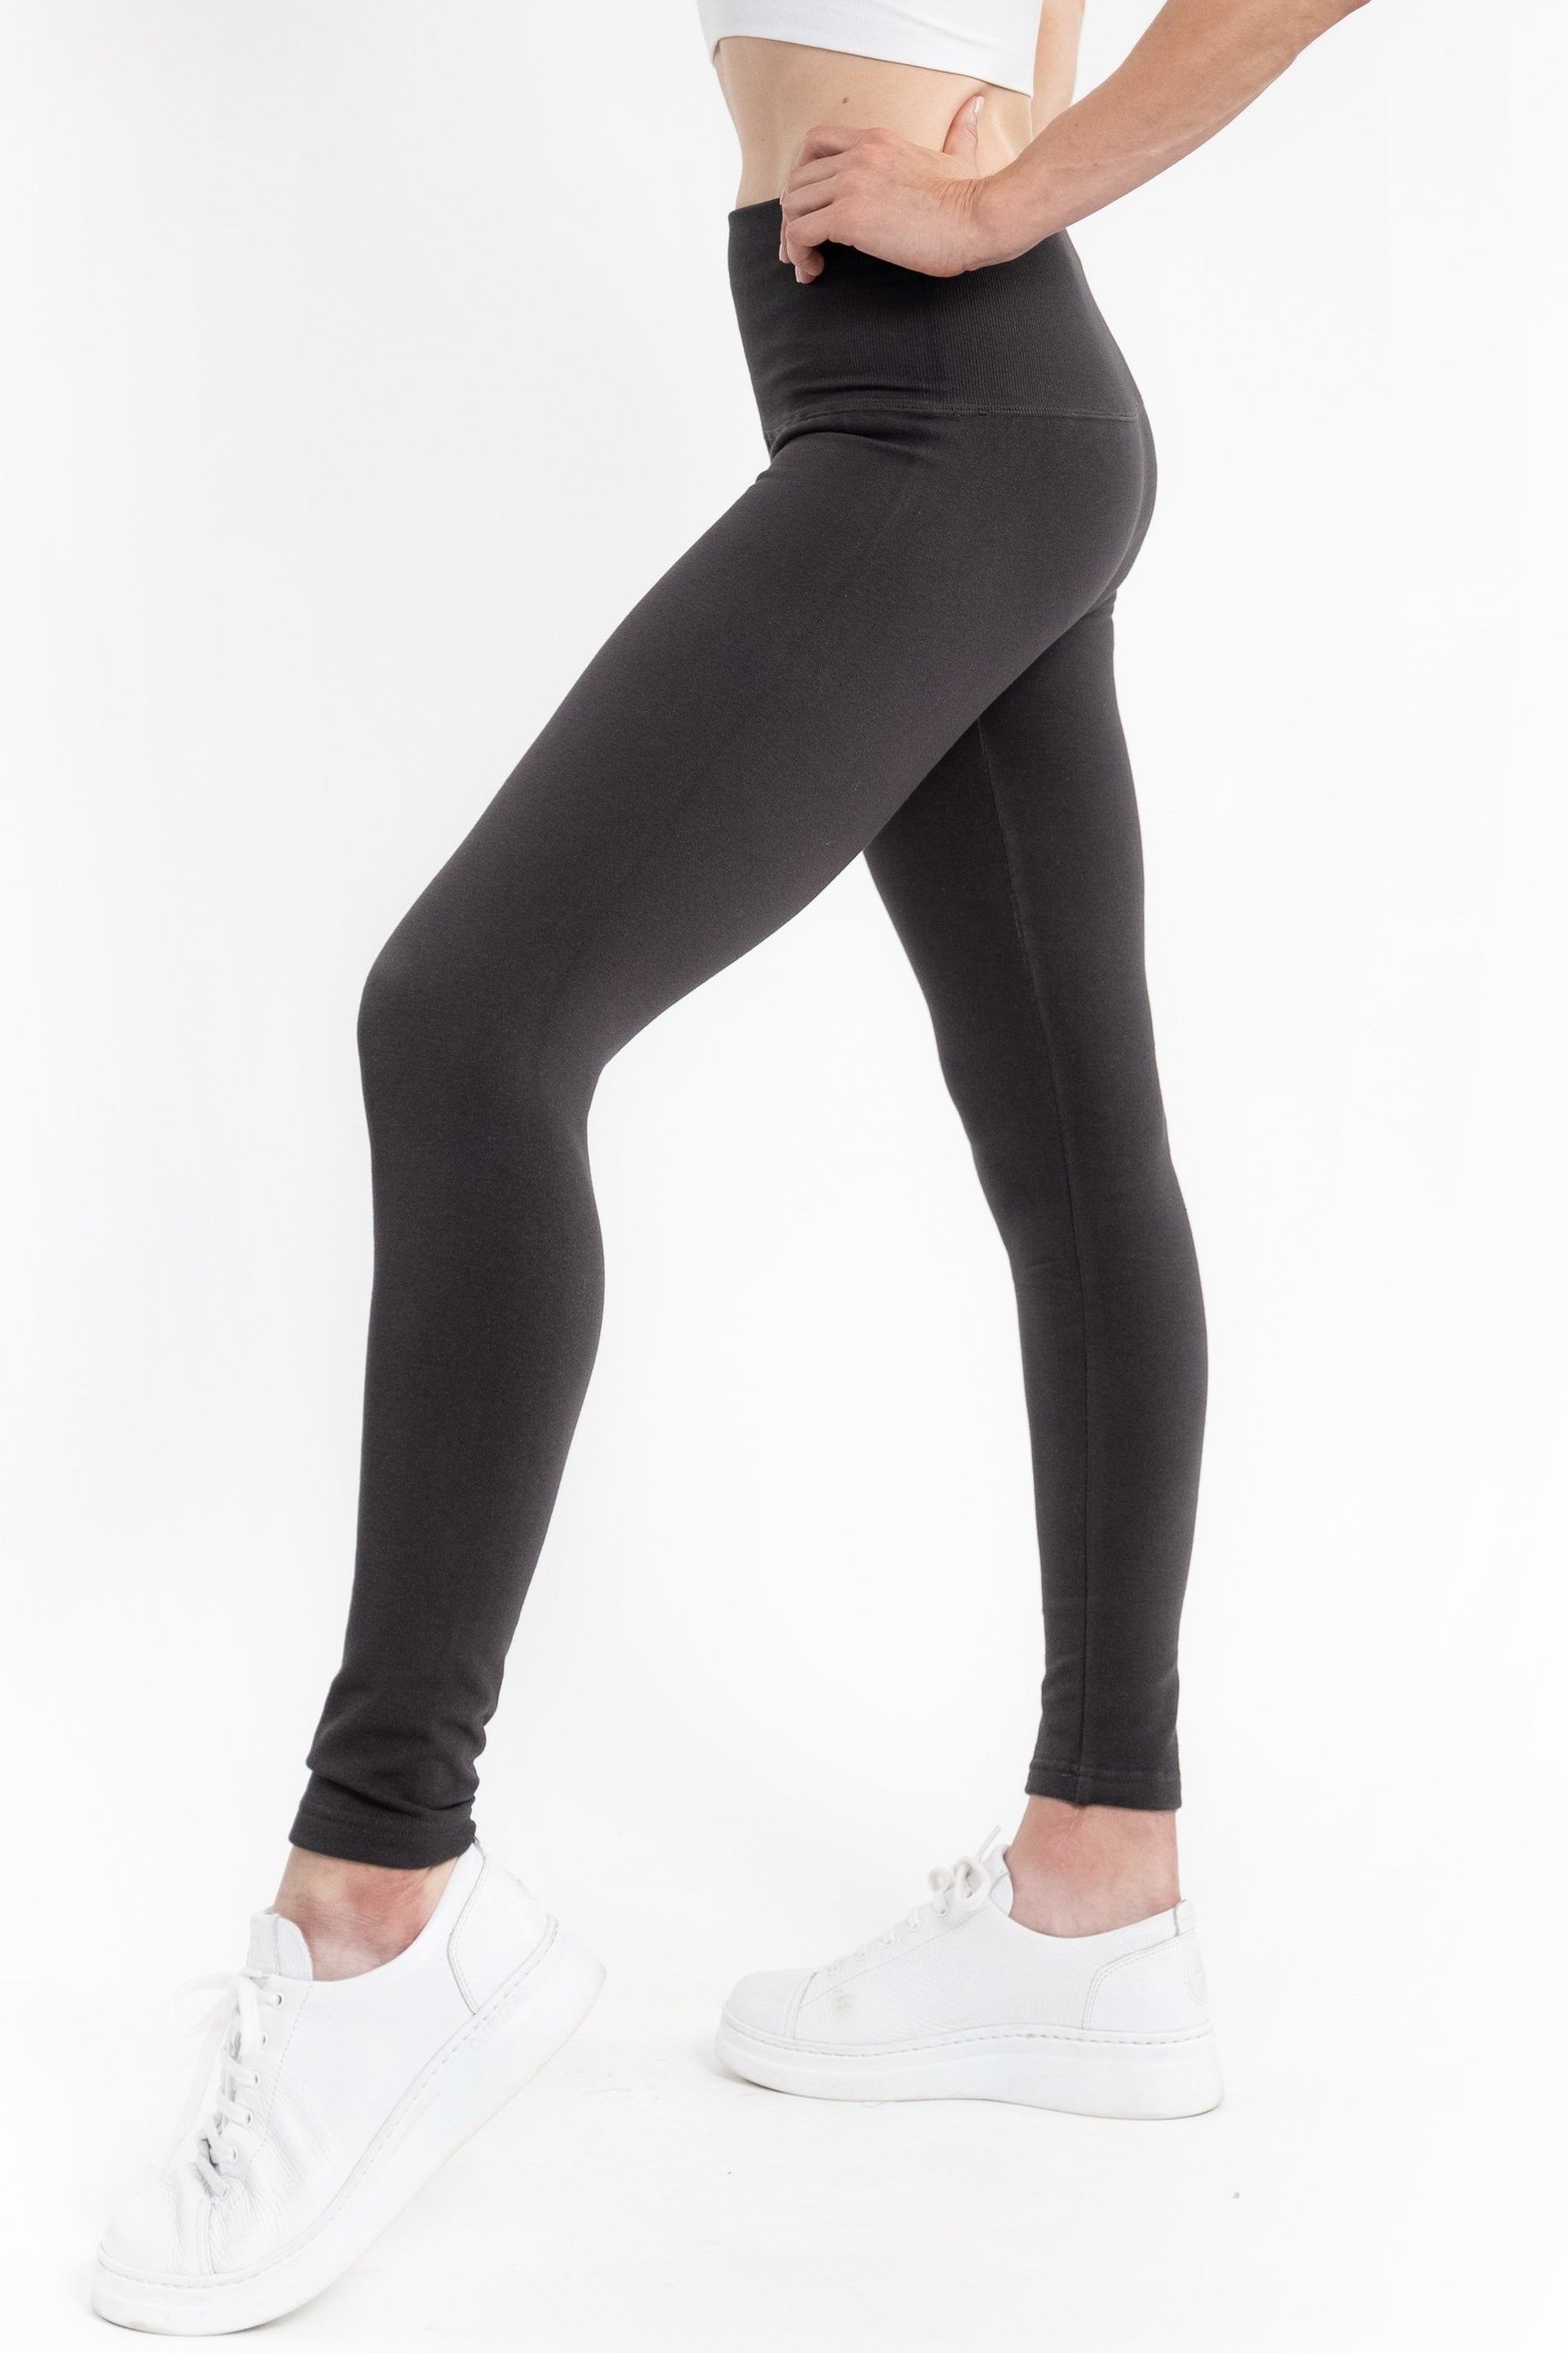 High Waisted Control Top Leggings - Charcoal – Shop Whimsicality